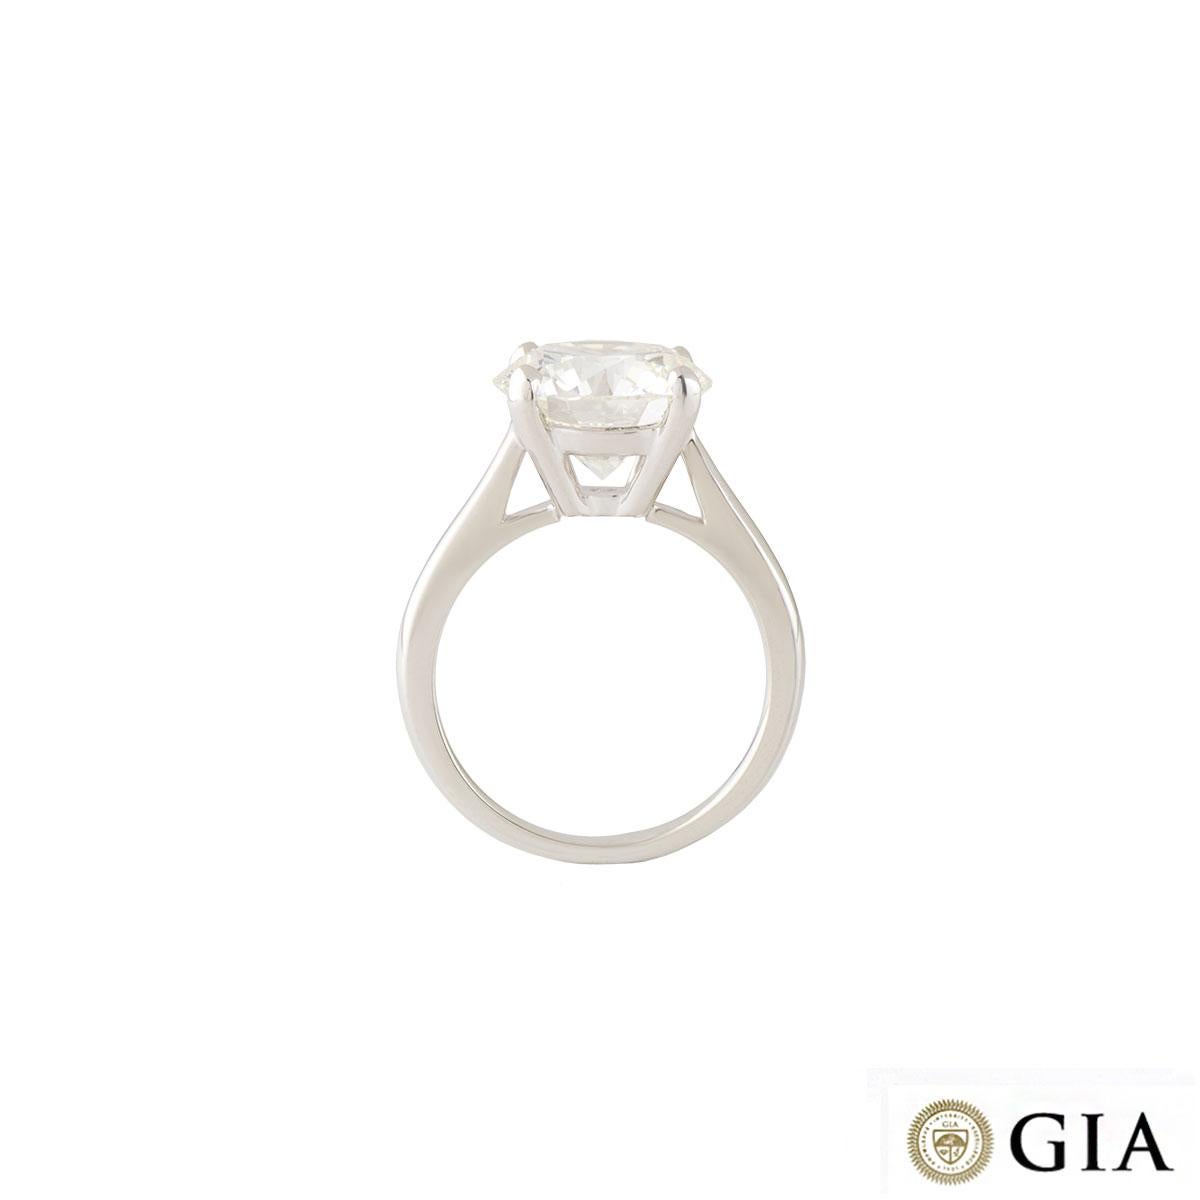 Women's GIA Certified Round Brilliant Diamond Solitaire Engagement Ring 5.01 ct J/VVS2 For Sale